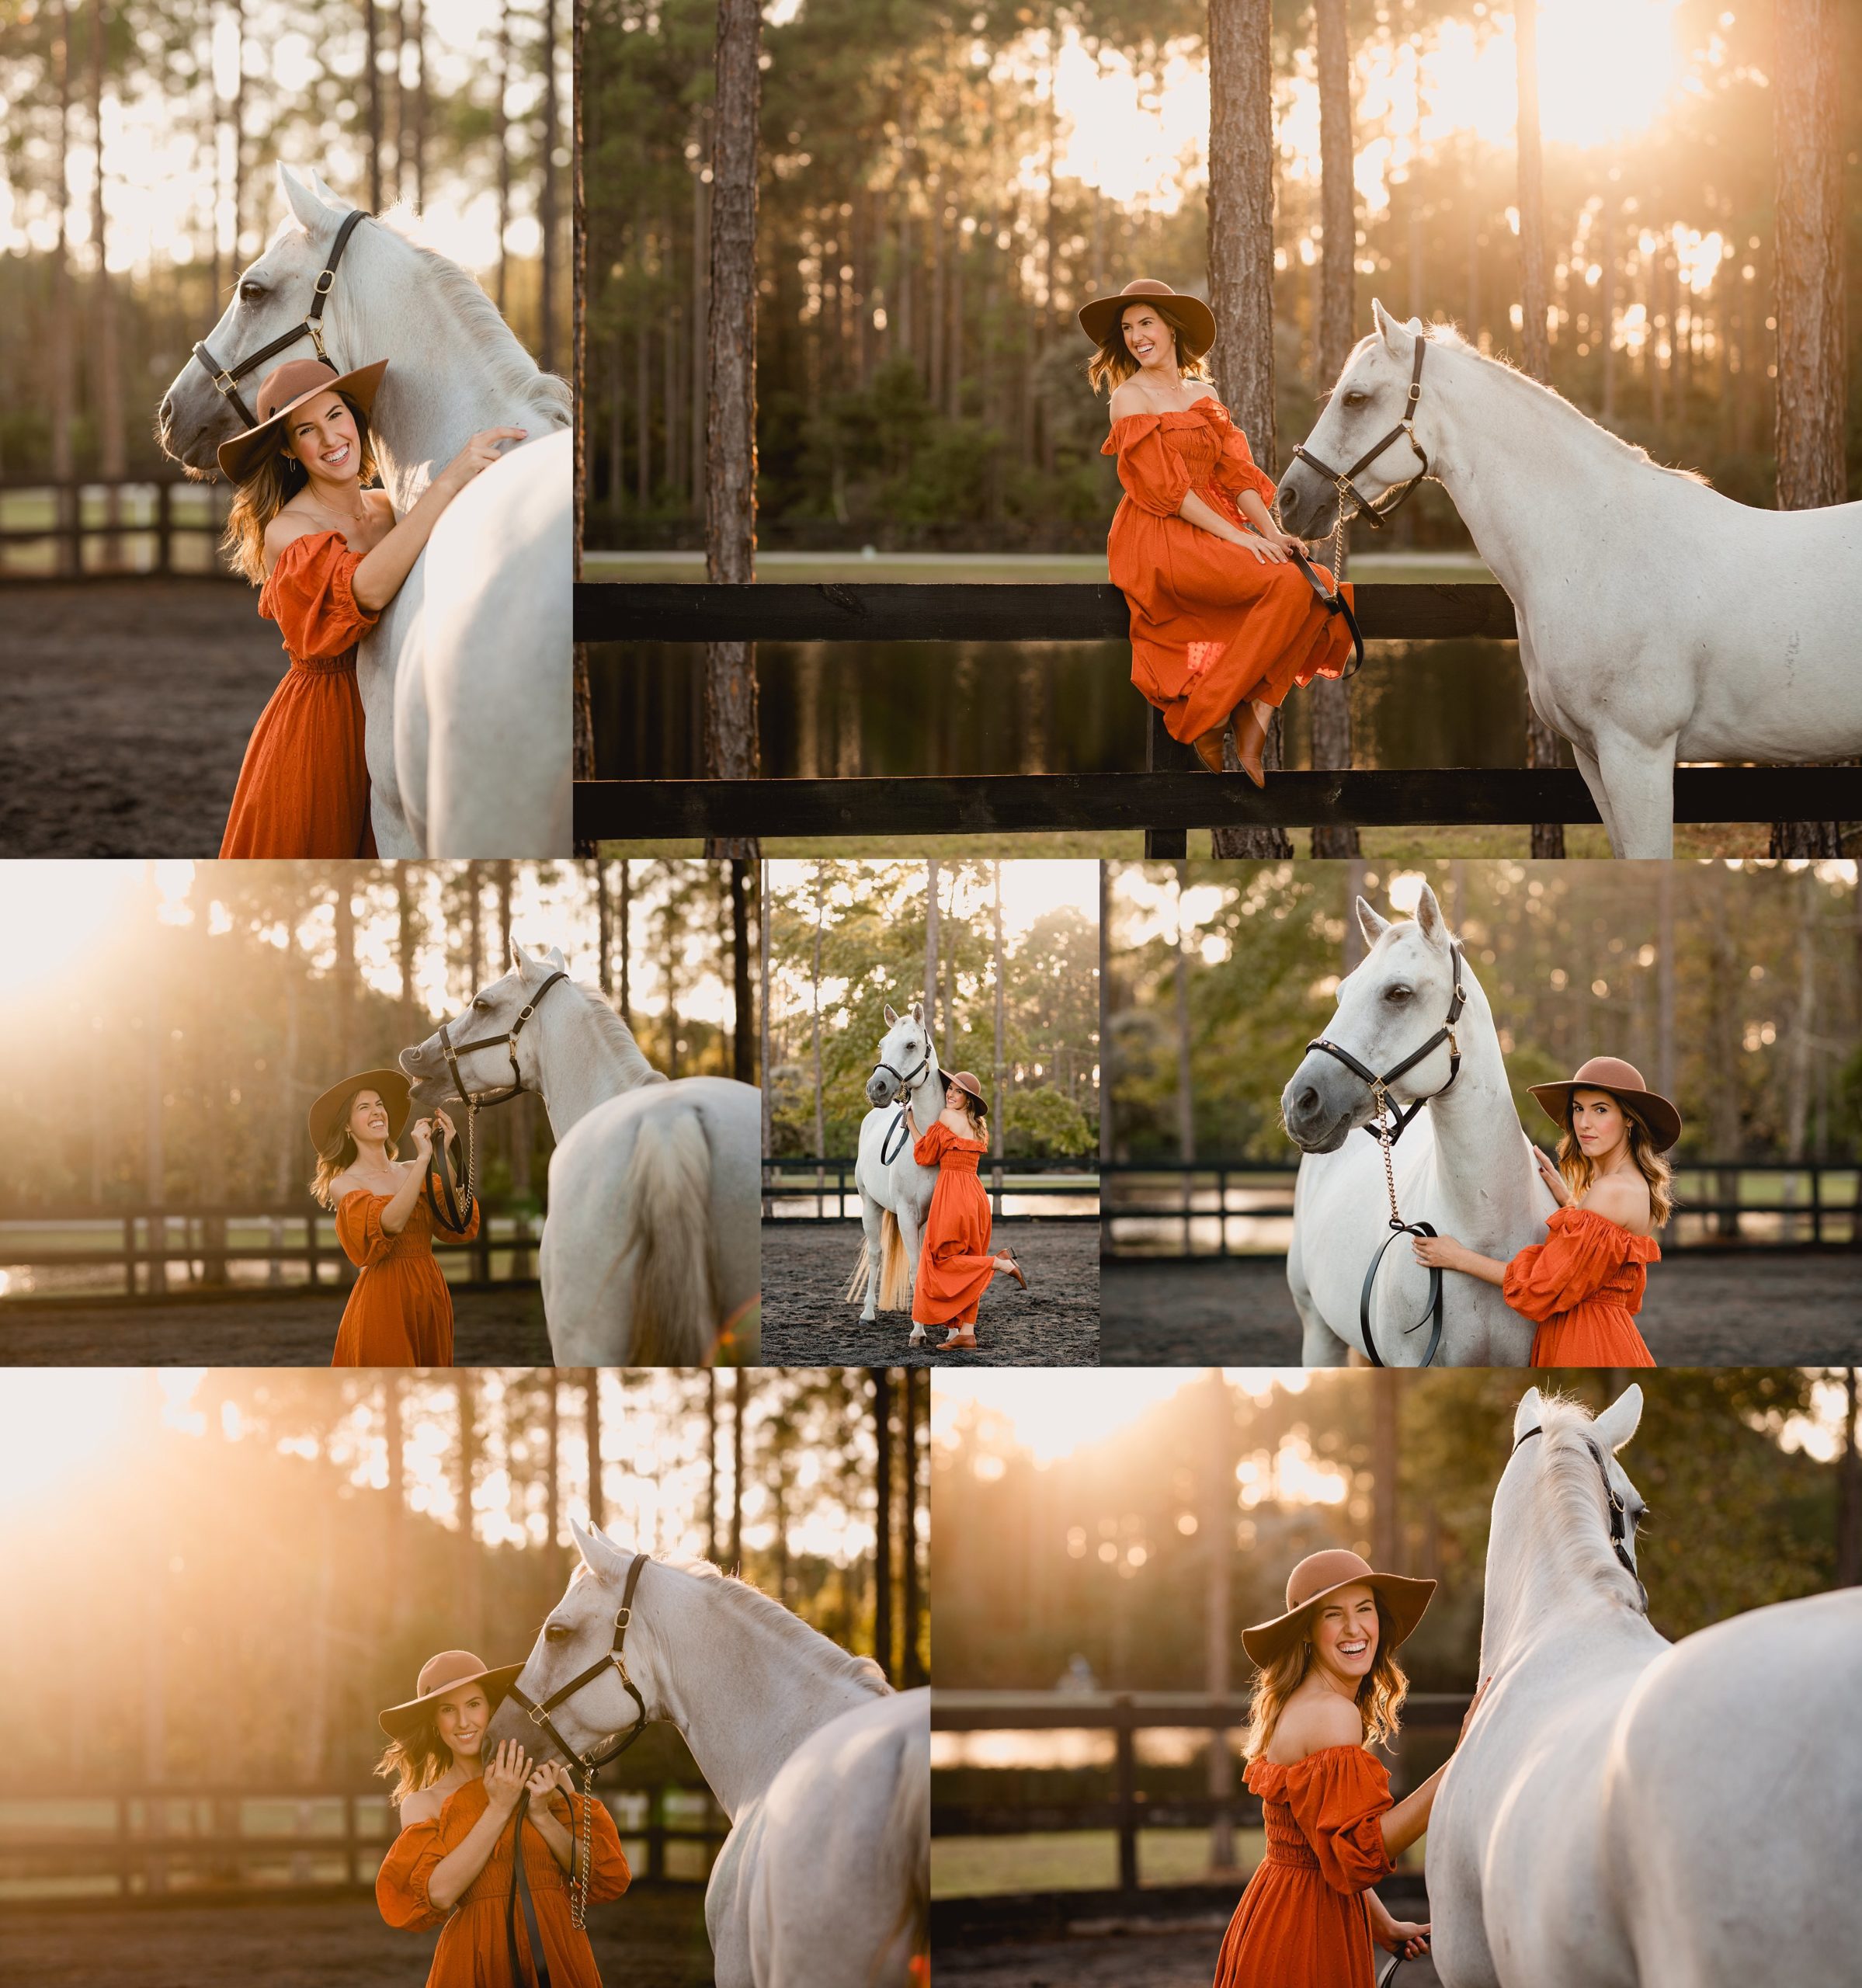 Horse and rider posing ideas at sunset with a dress. Jacksonville, fl - equine photographer - horse photography - golden hour